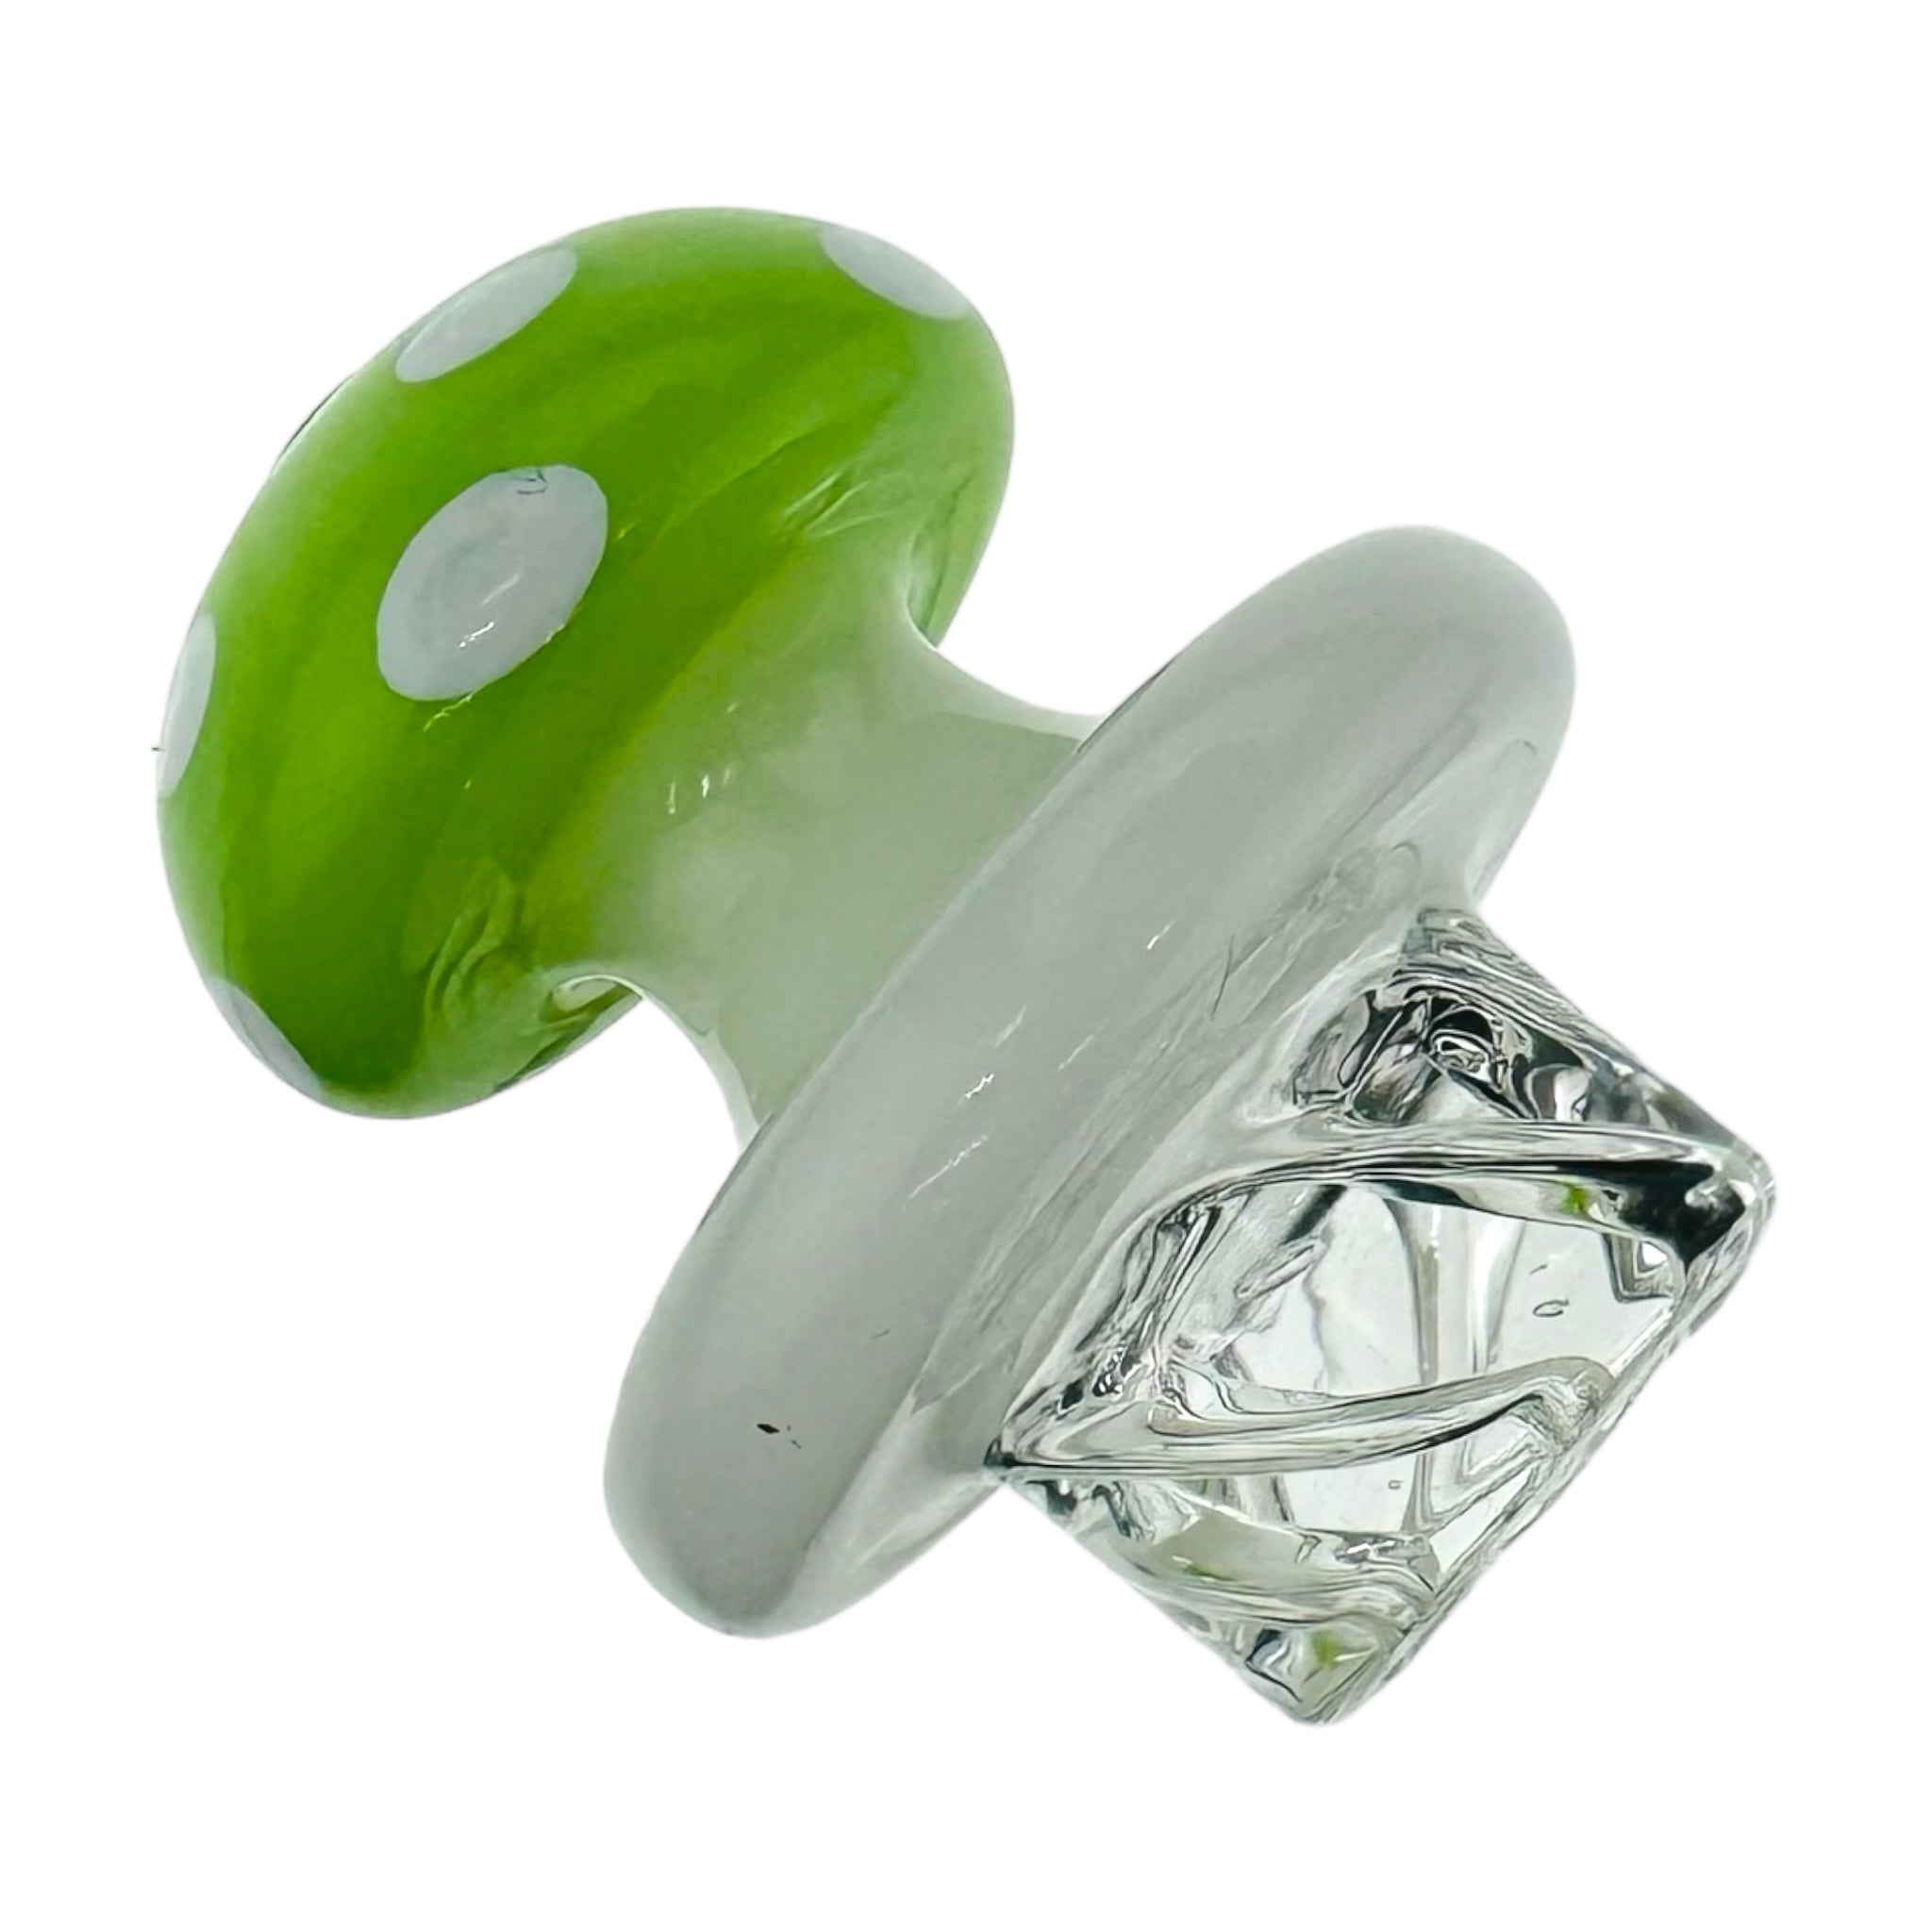 Spinner Carb Cap With Mushroom Top Green & White